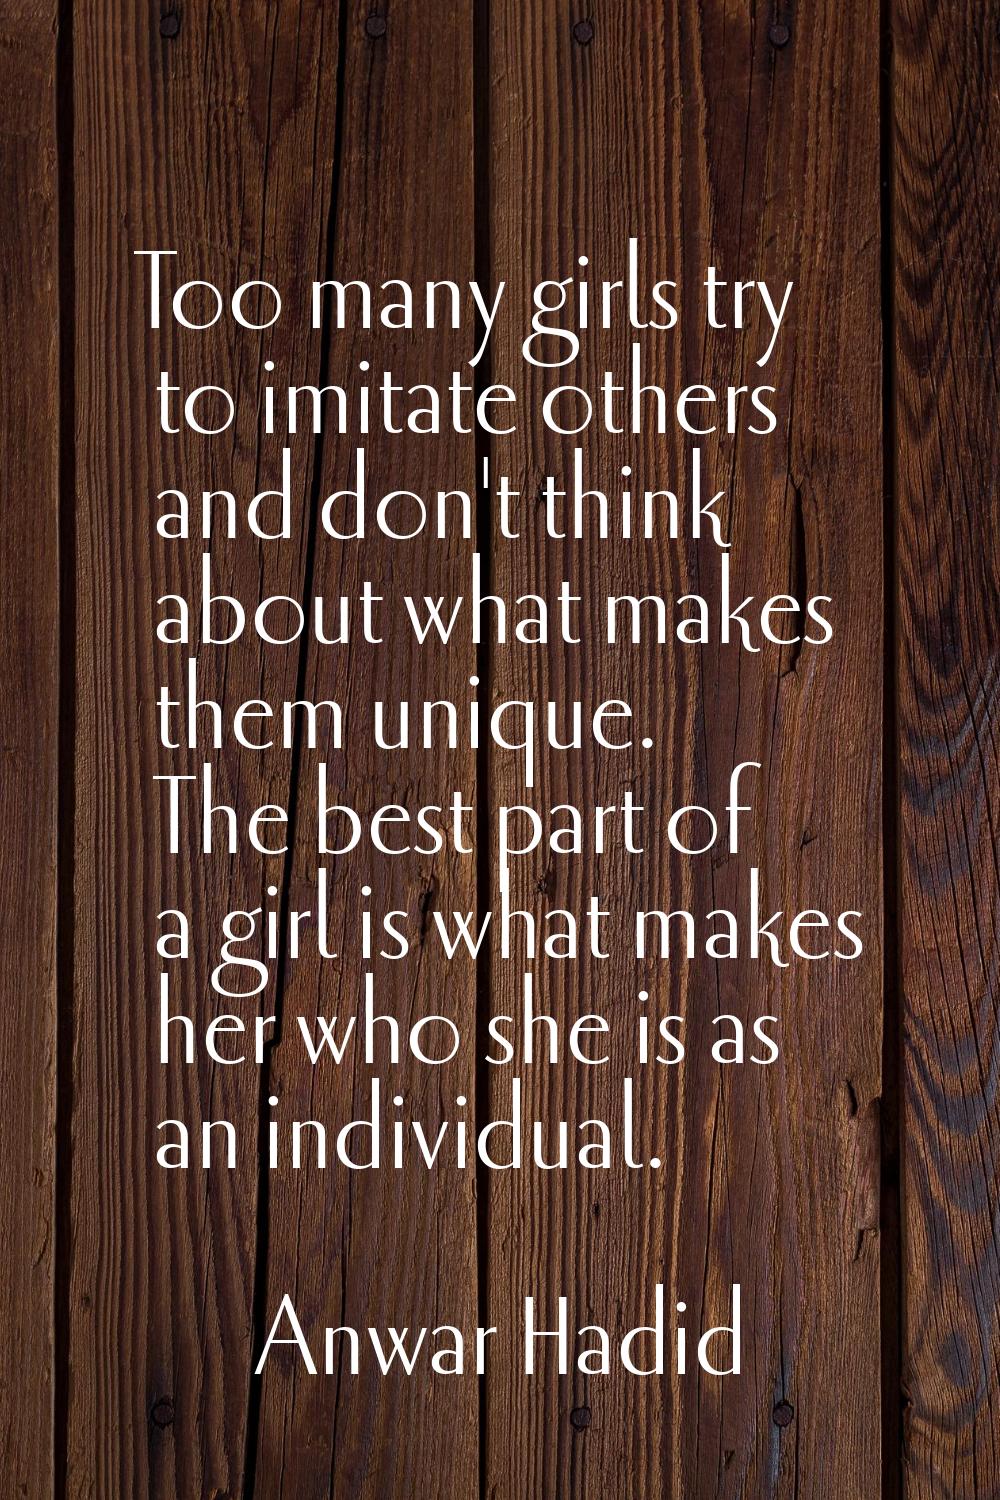 Too many girls try to imitate others and don't think about what makes them unique. The best part of